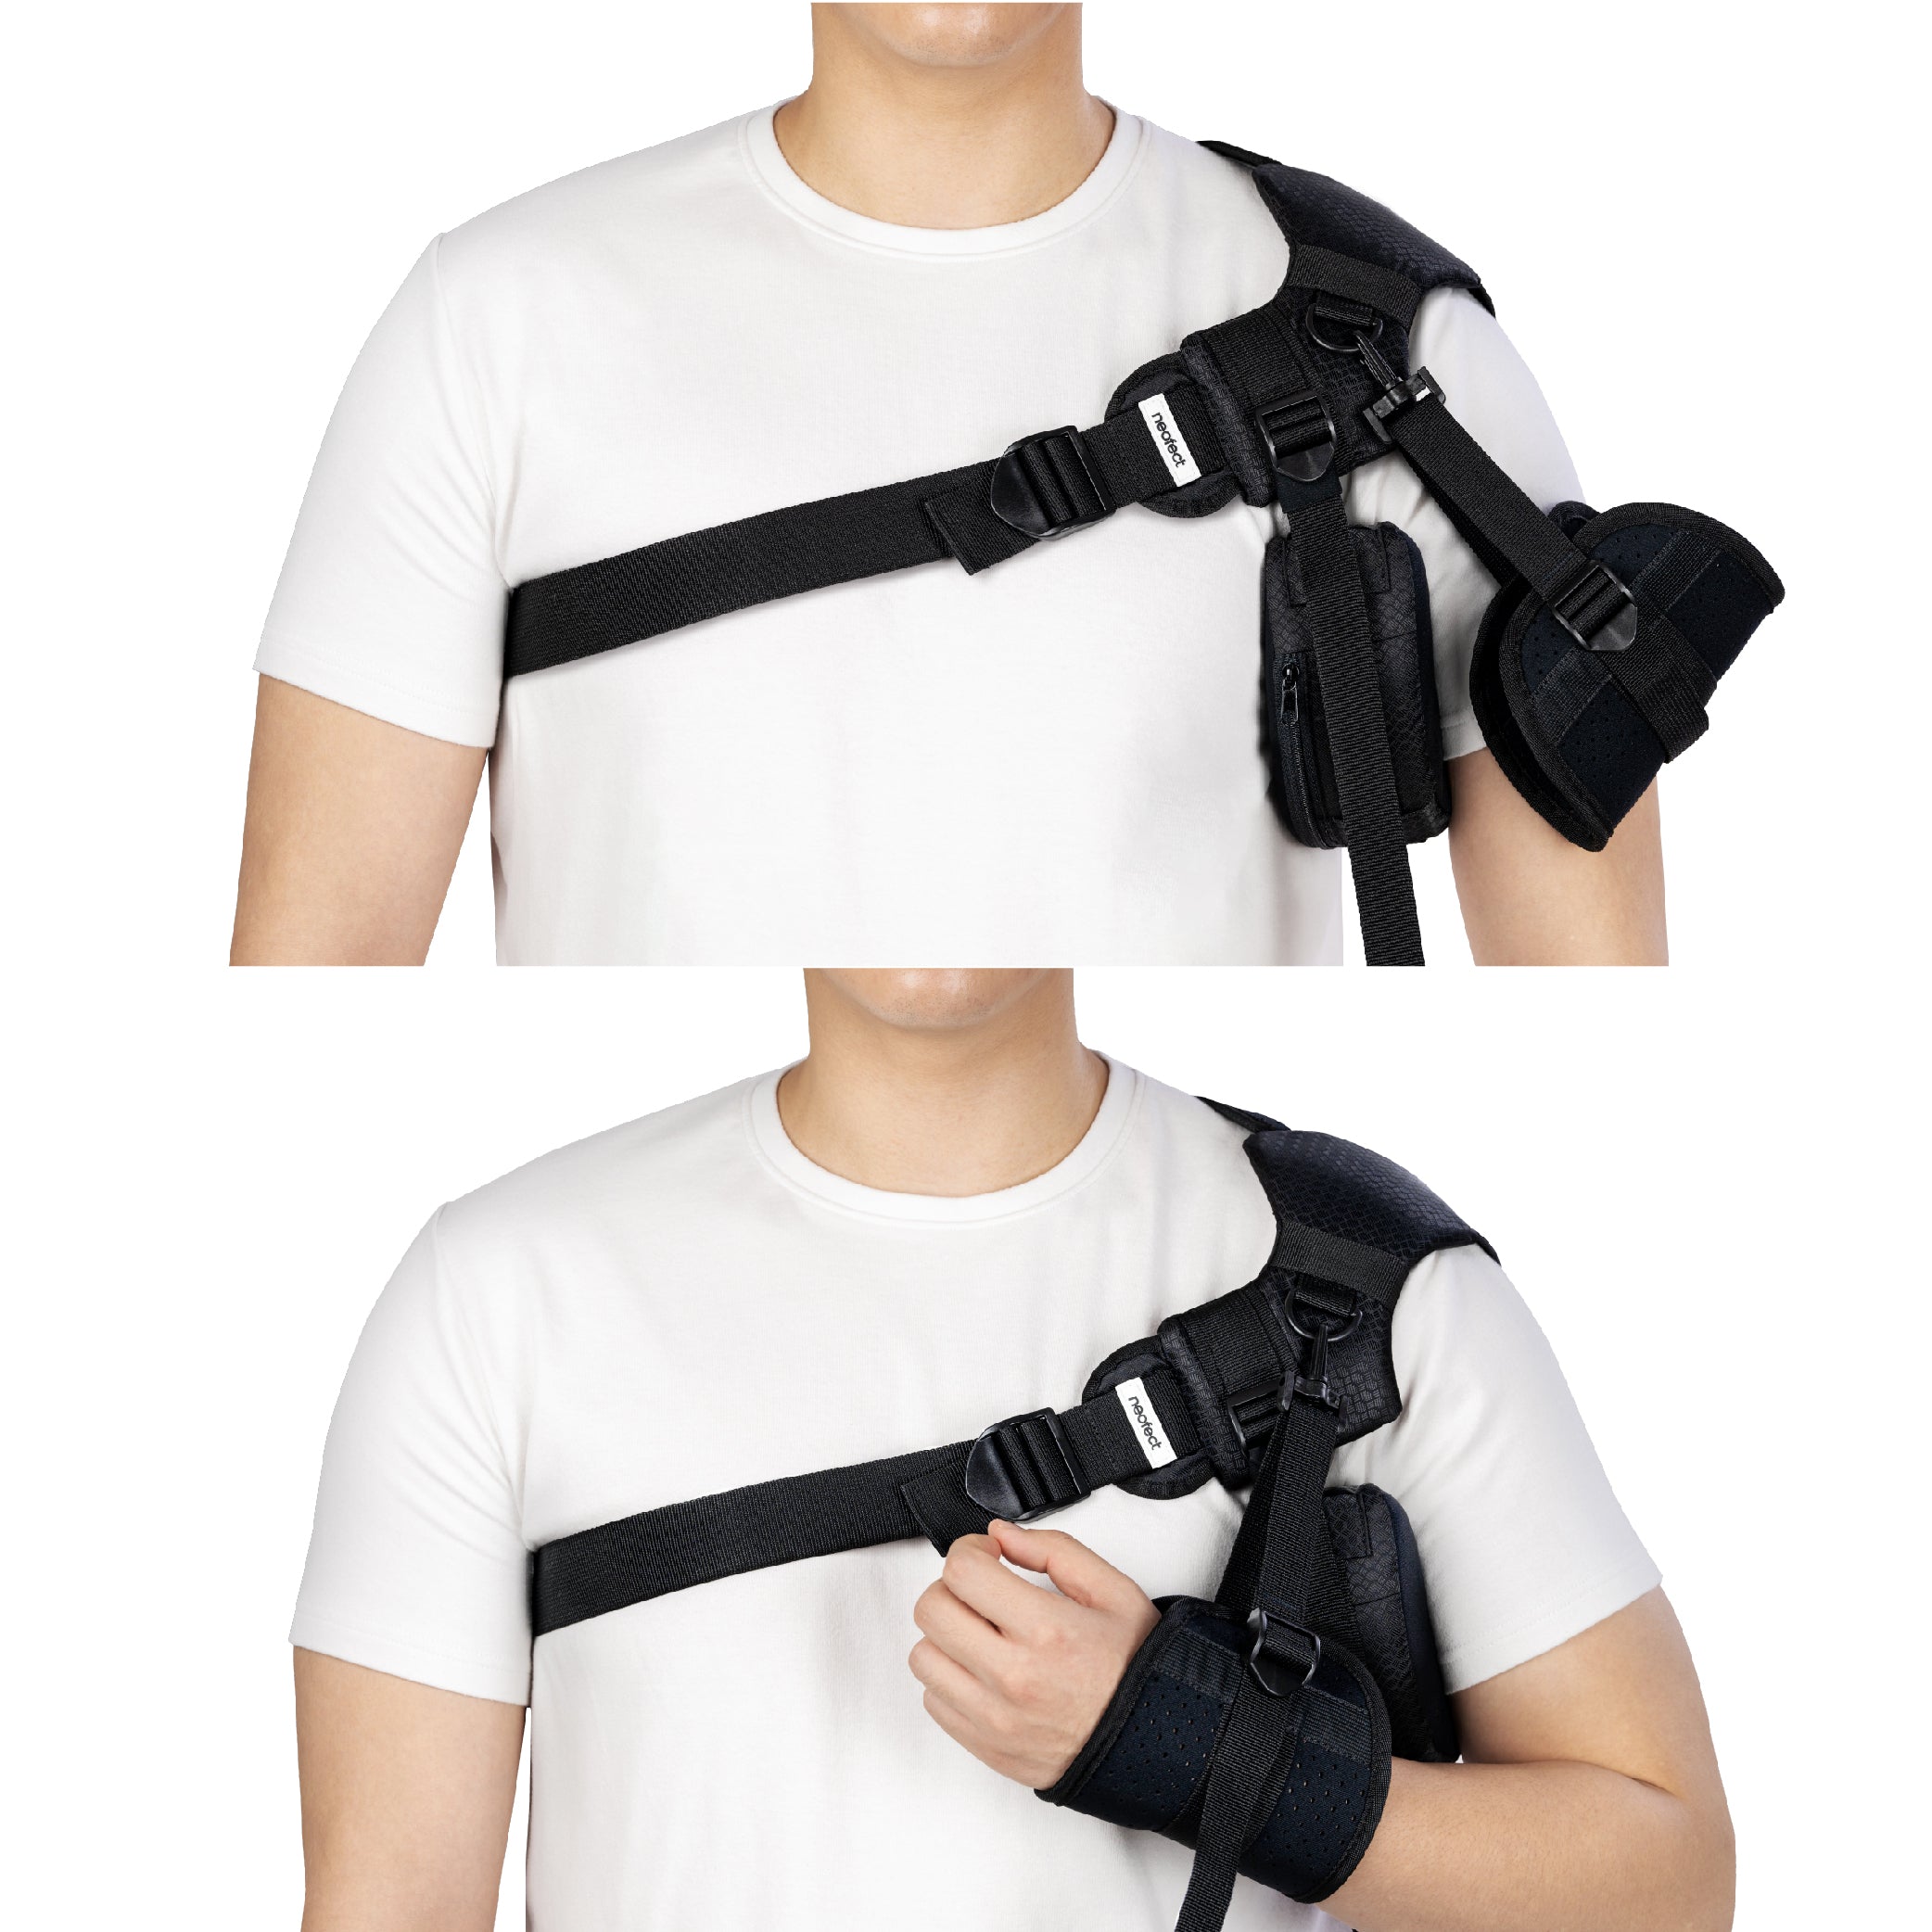  Neo-G Shoulder Brace Support - for Rotator Cuff